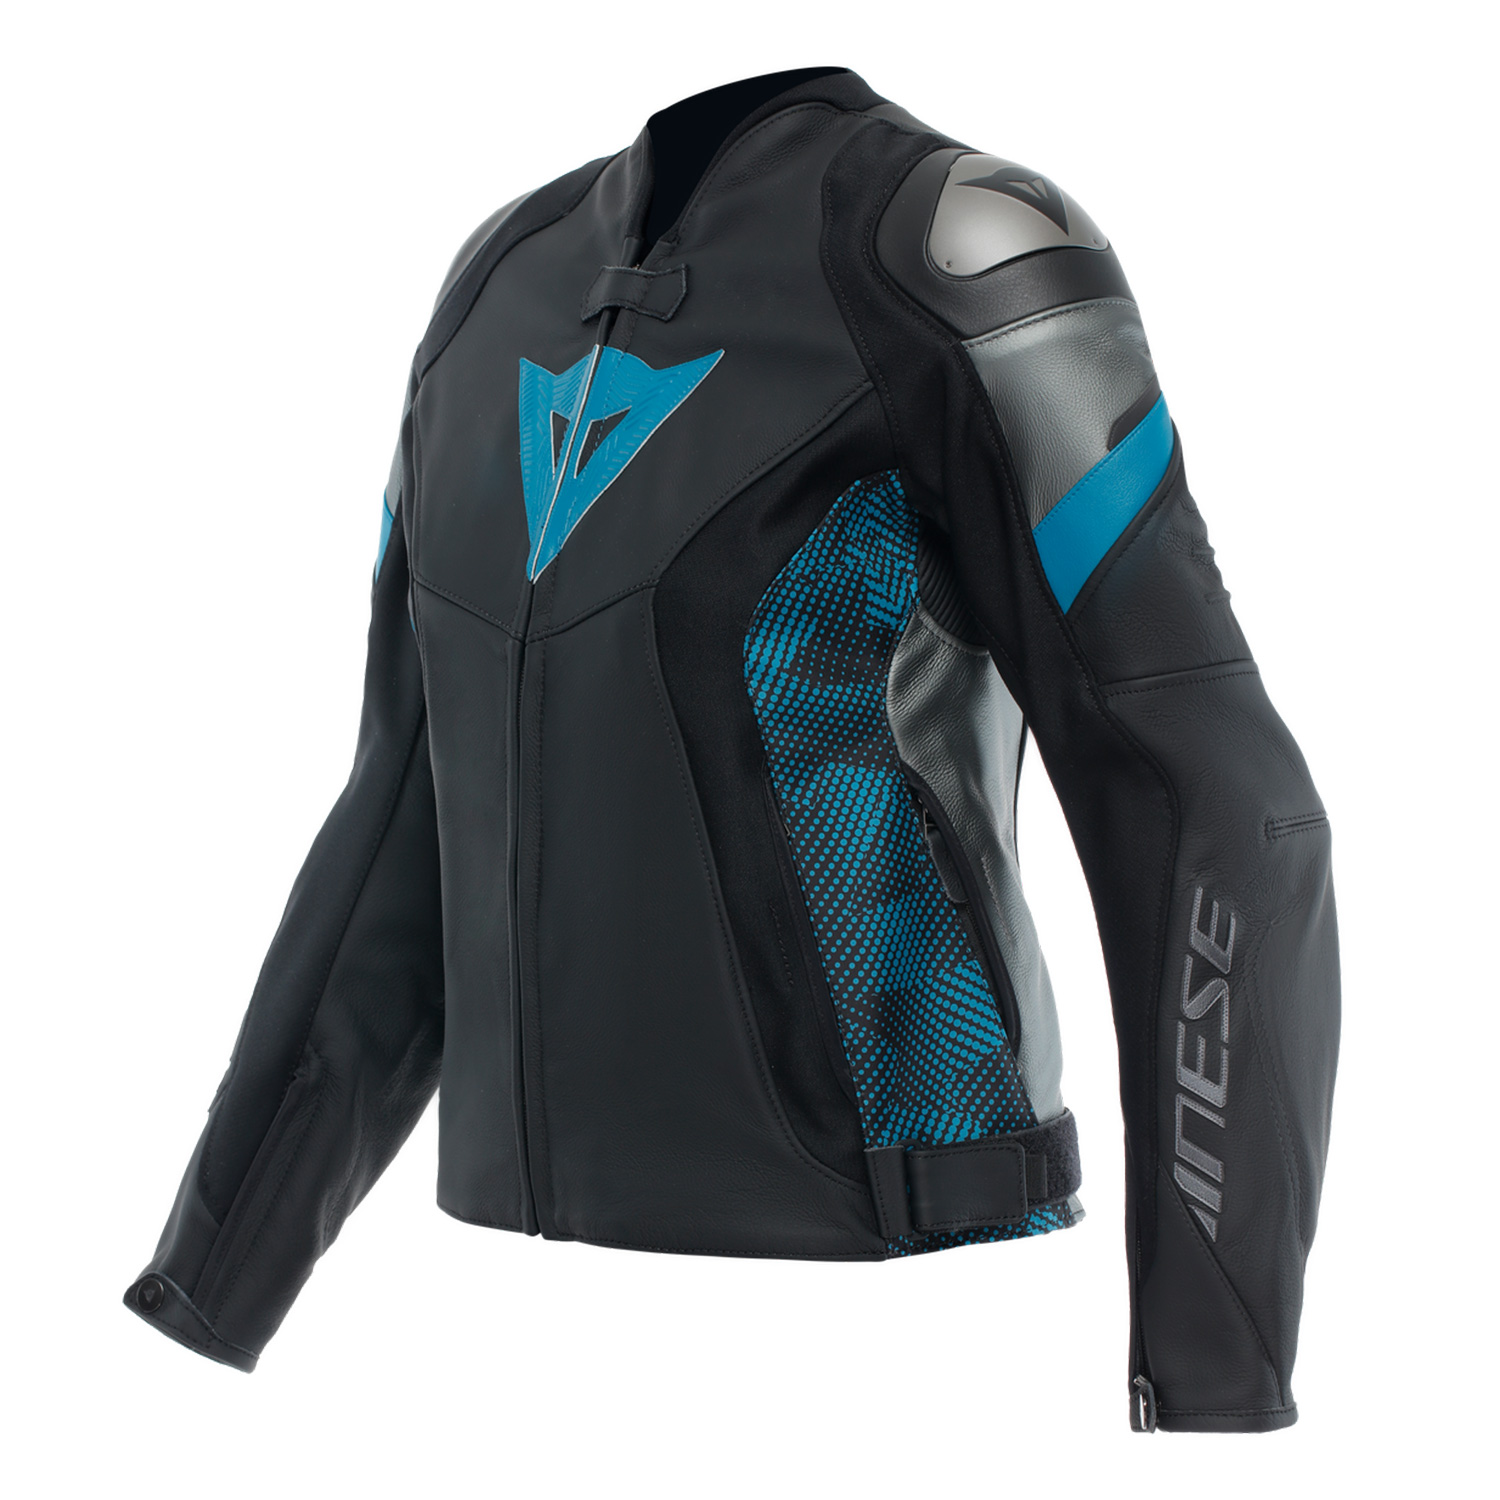 Image of EU Dainese Avro 5 Leather Jacket WMN Black Teal Anthracite Taille 46